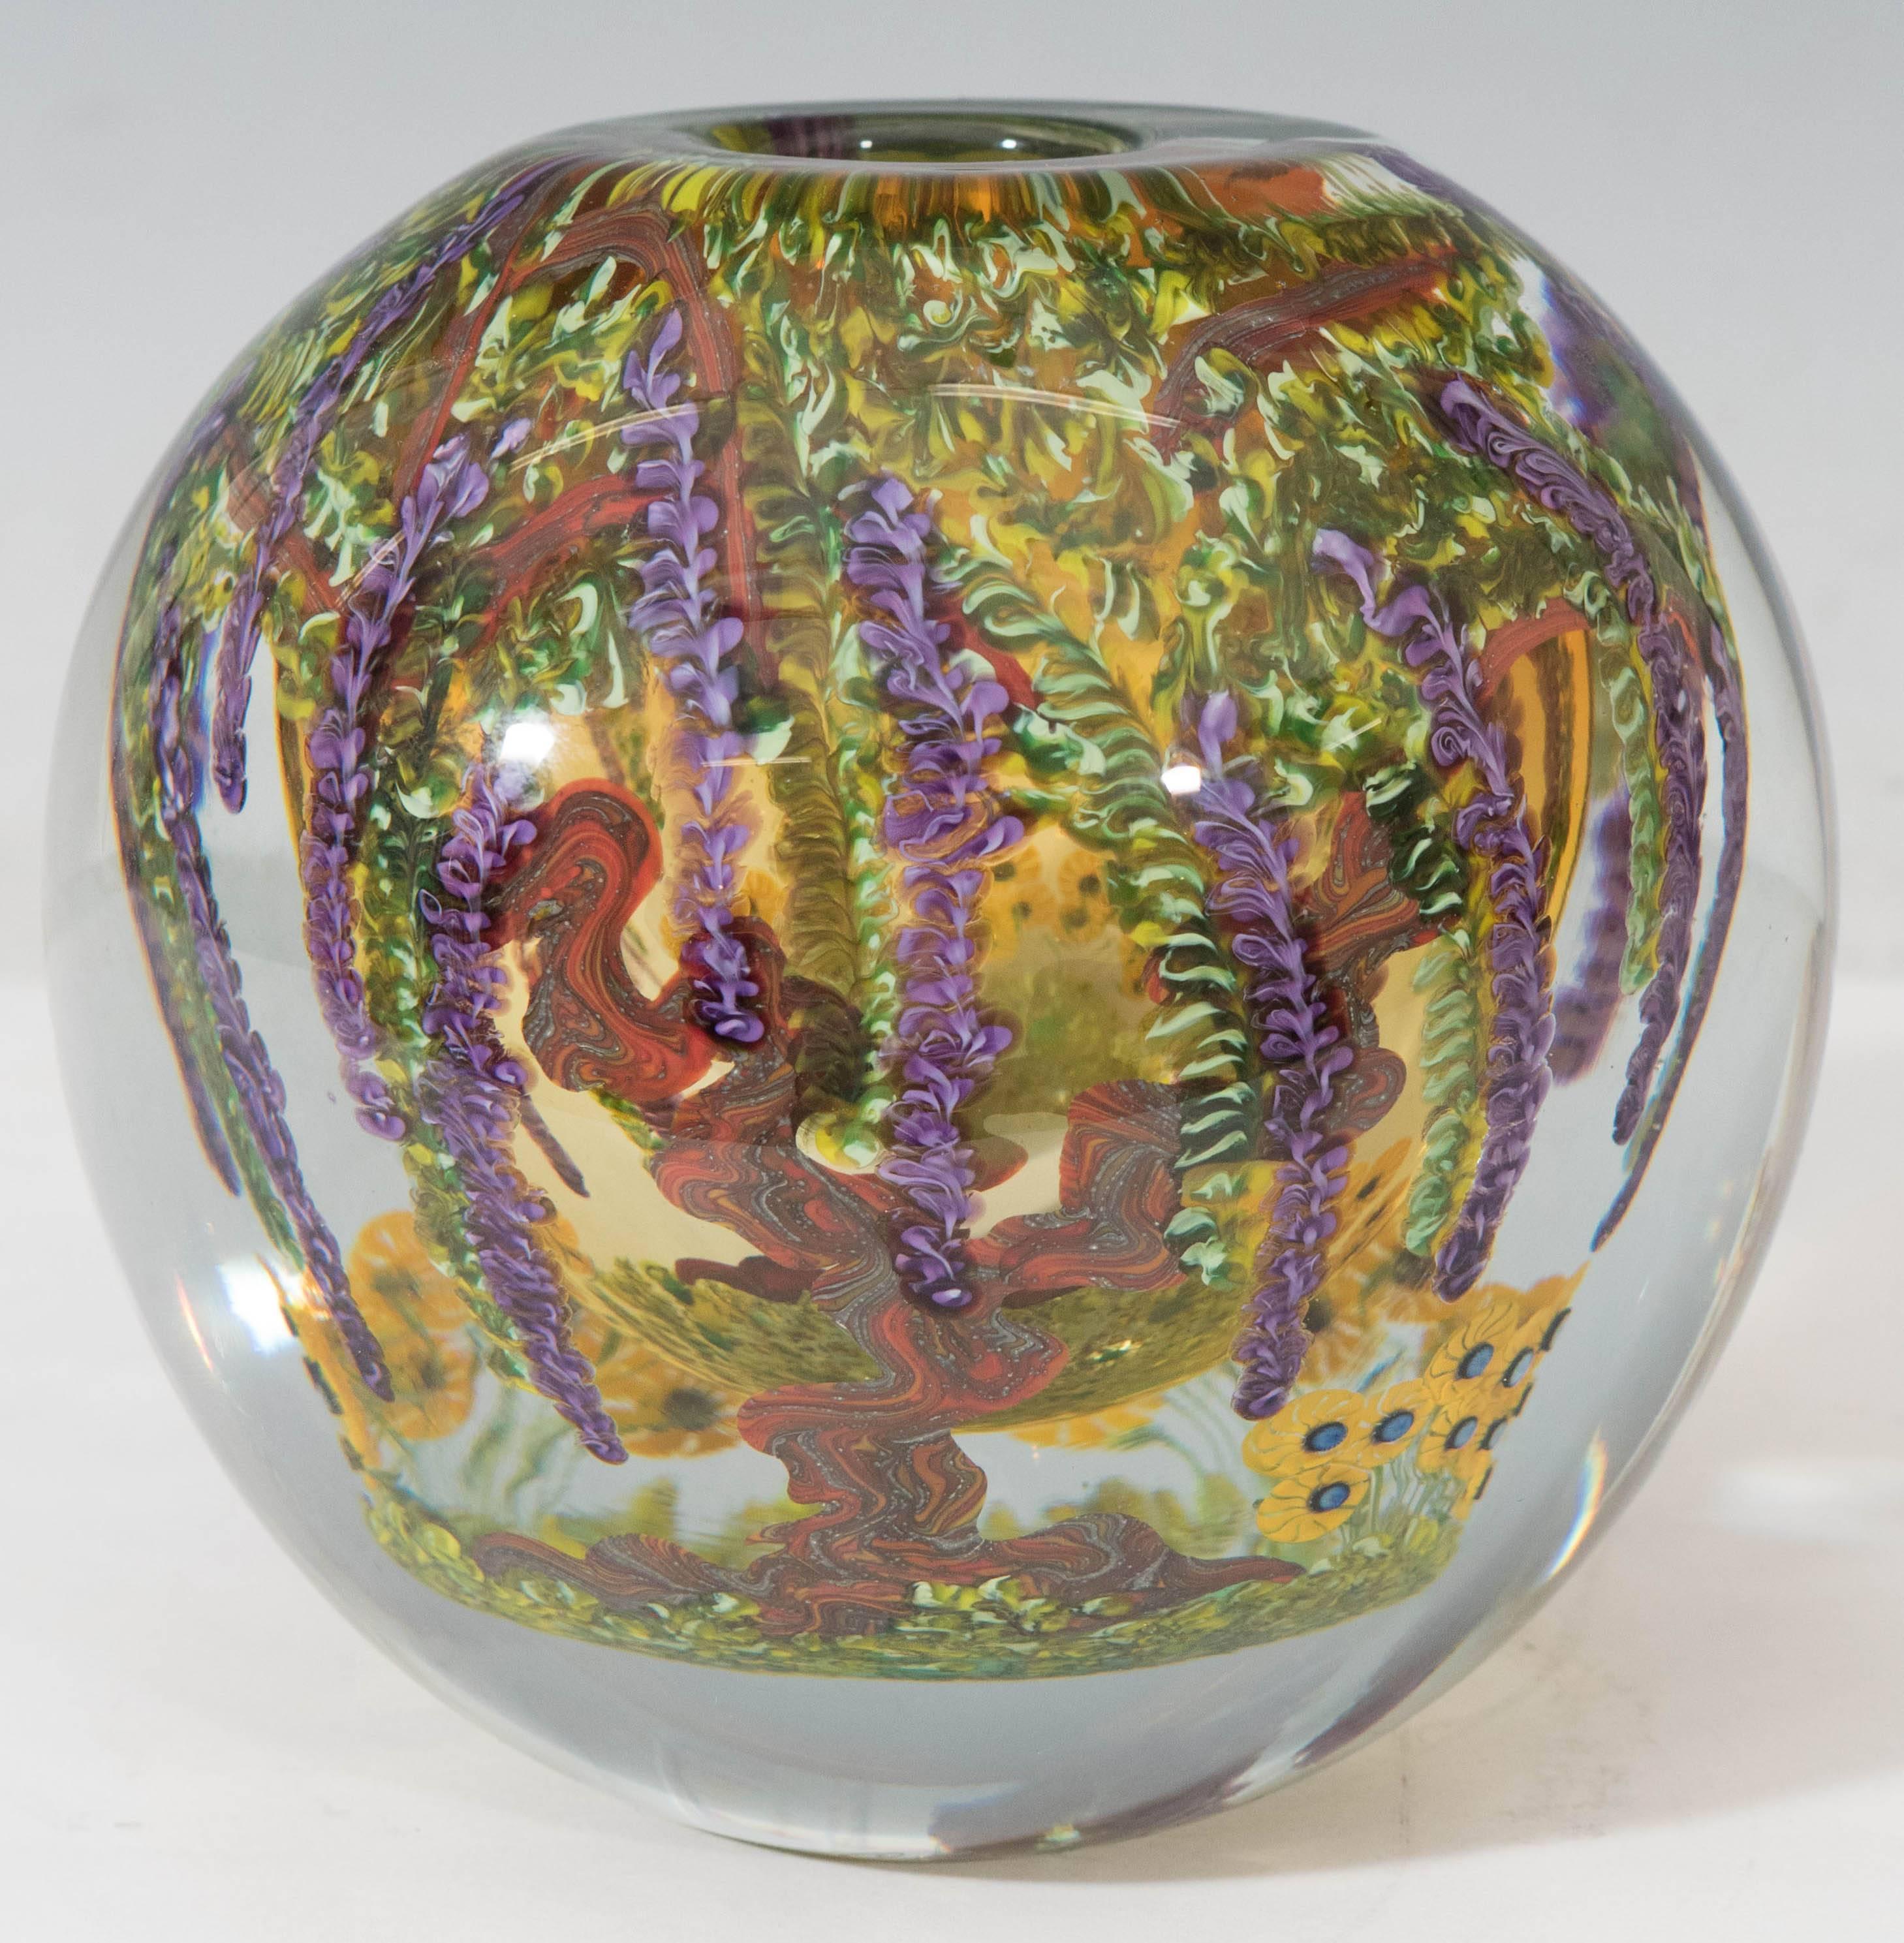 20th Century Chris Heilman Round Art Glass Vase with Wisteria and Flowers